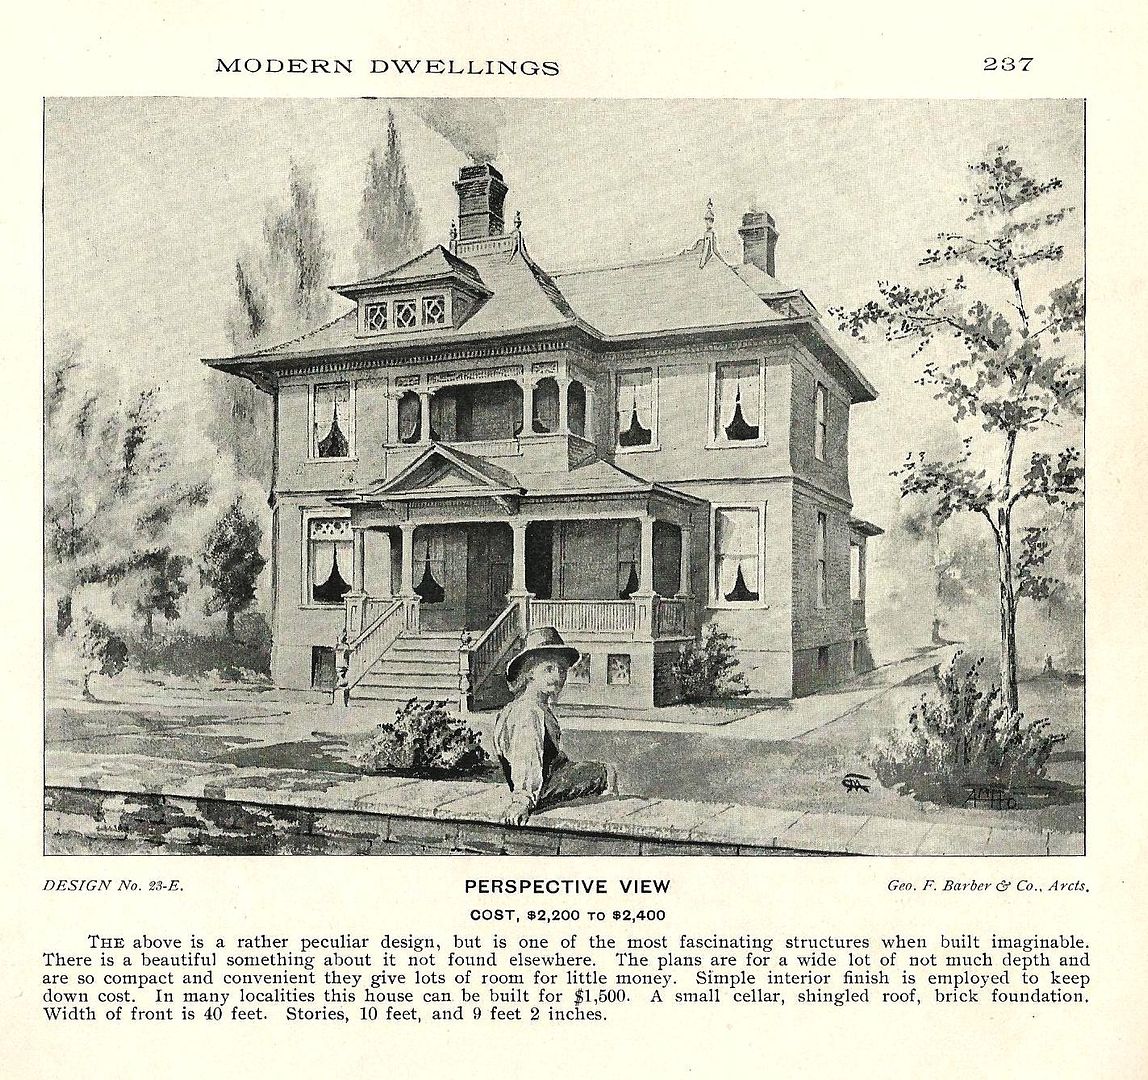 When Pat Spriggs and I were talking last week, she mentioned that there was a George Barber house in Riverview (part of Colonial Place/Riverview neighborhood, where I lived for four years). I was incredulous, as I thought Riverview was too new to have Barber houses but then...